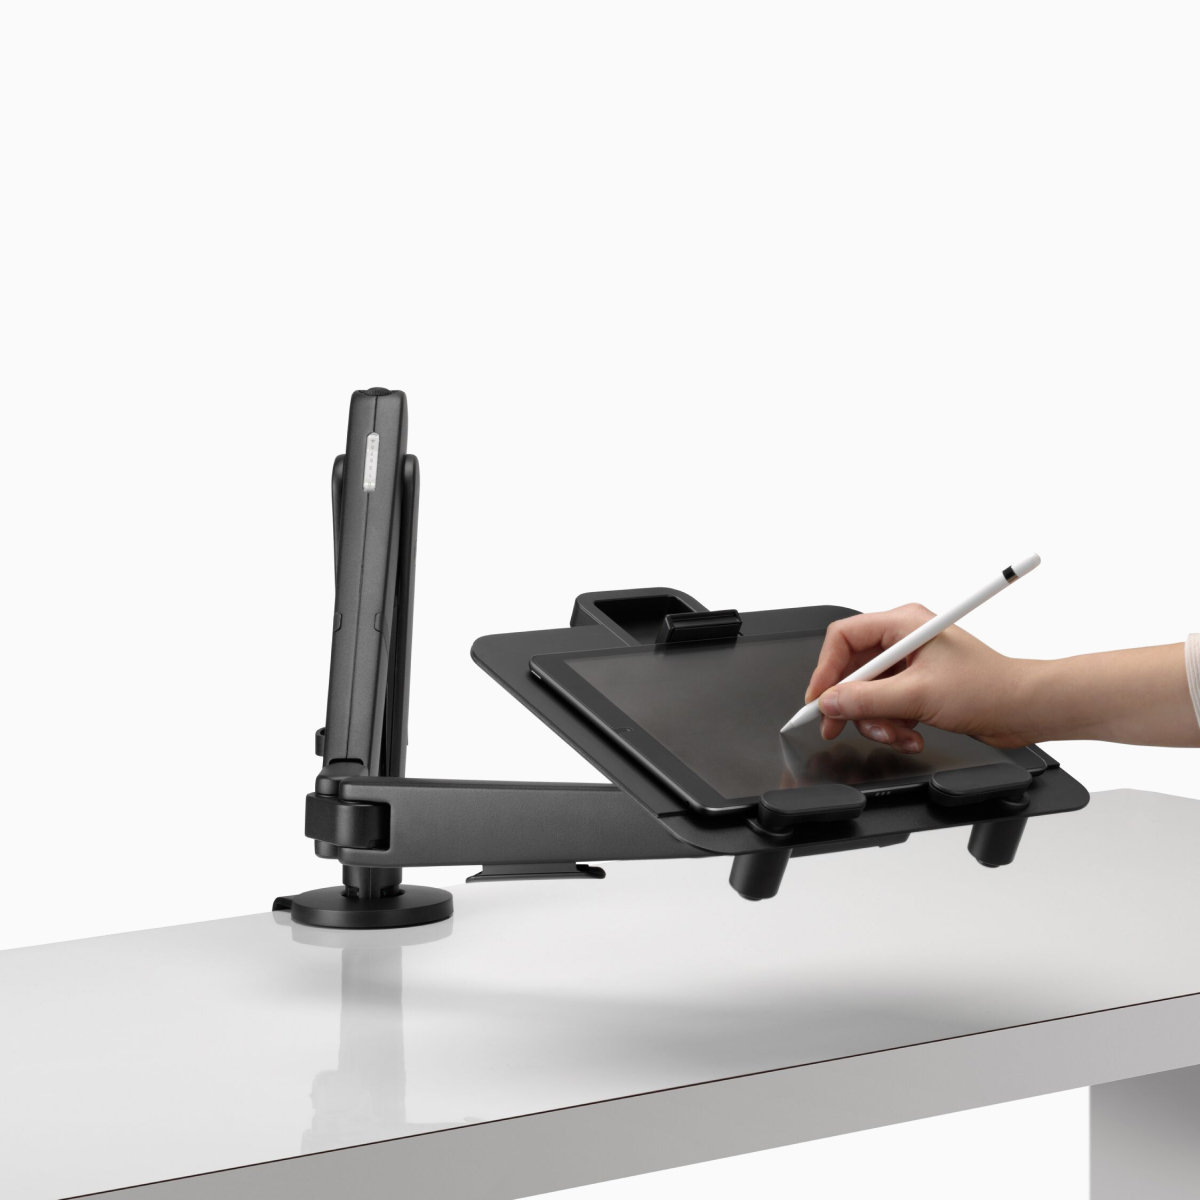 A person's hand shown drawing on a tablet supported in a landscape position by an Ollin Laptop and Tablet Mount connected to a black Ollin Monitor Arm.